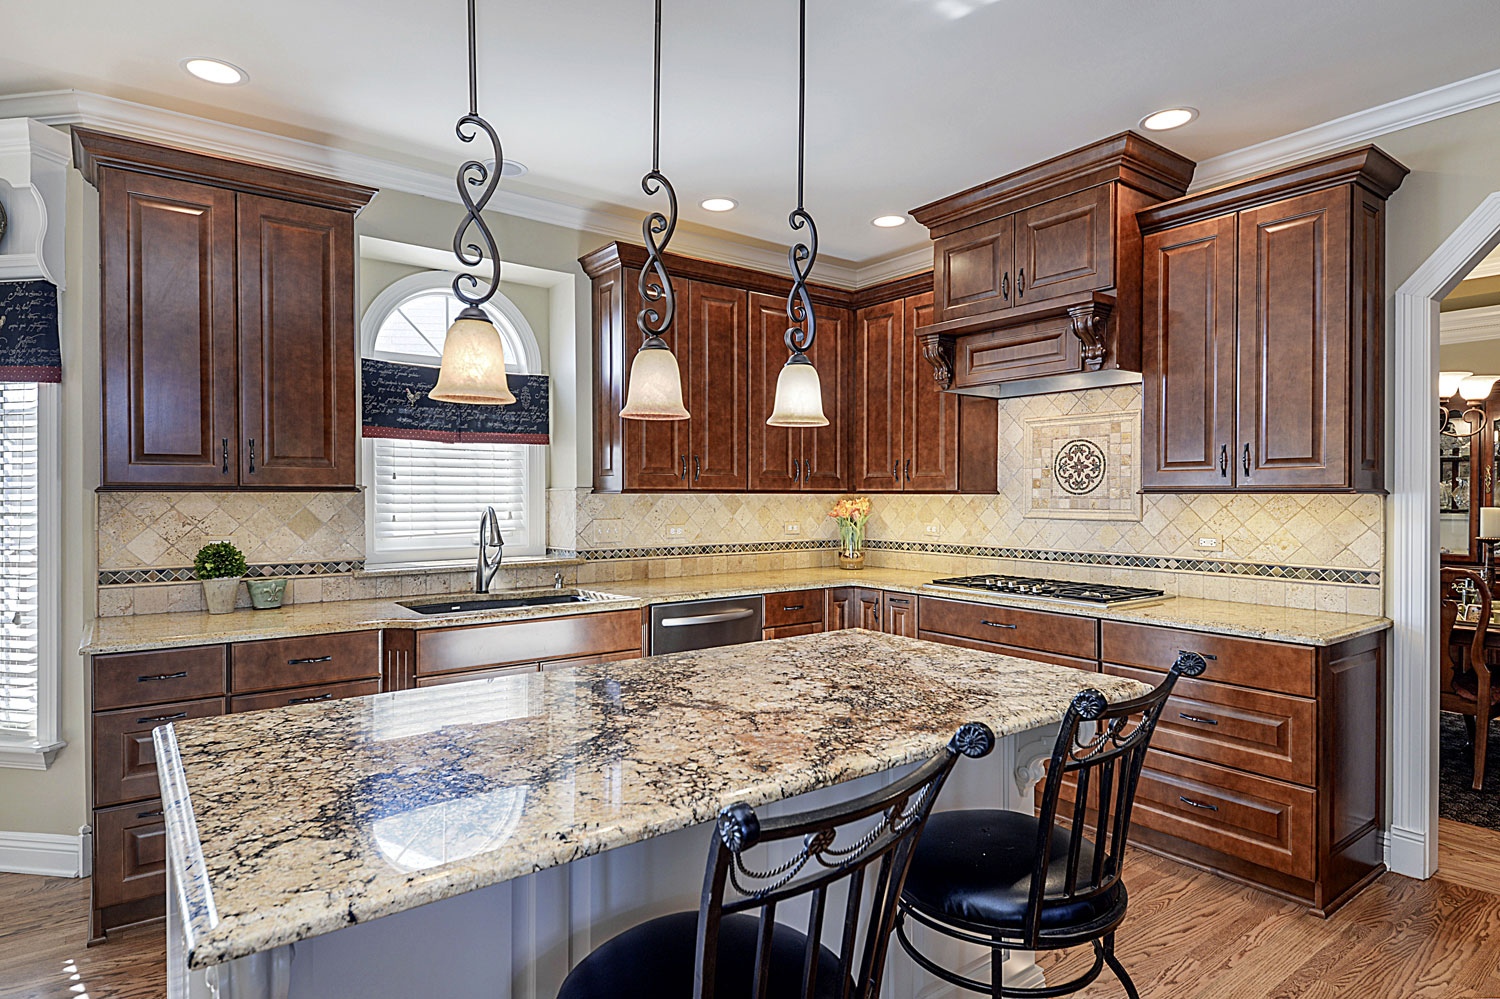 Steve & Terri's Kitchen Remodel Pictures | Luxury Home Remodeling ...